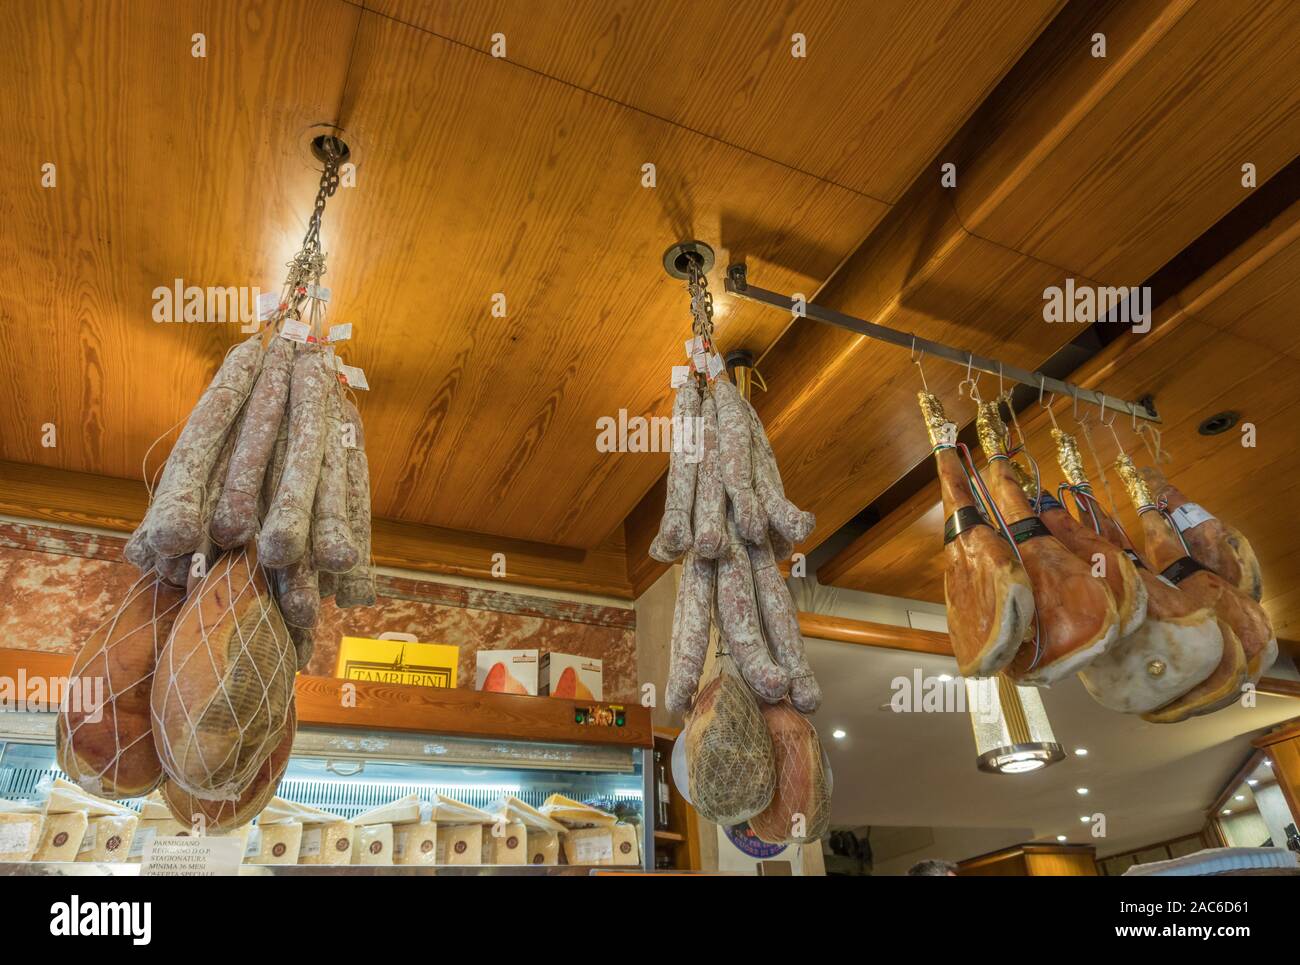 29 MARCH 2019, BOLOGNA, ITALY: sausages and cheese in a shop in italy Stock Photo